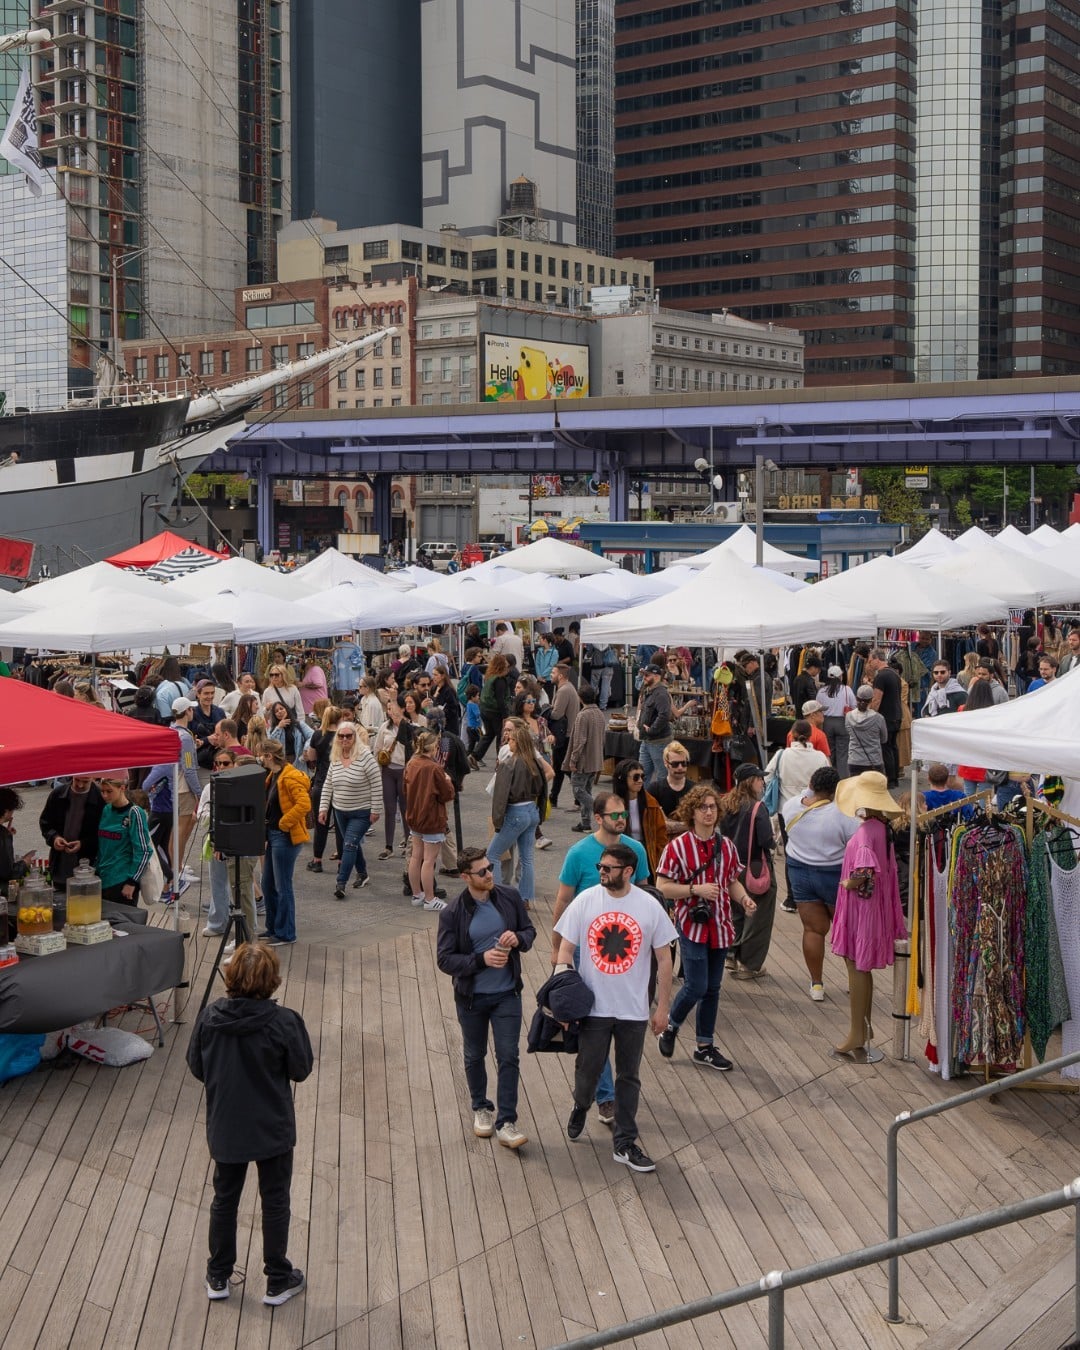 Soak up sweater weather and strut your stuff in your best costume at the city’s coolest street fair. The @hesterstreetfair Halloween market is happening next weekend at #TheSeaport. 🗓️ Oct. 28 & 29  11am – 6pm  Seaport Square Details ➤ link in bio